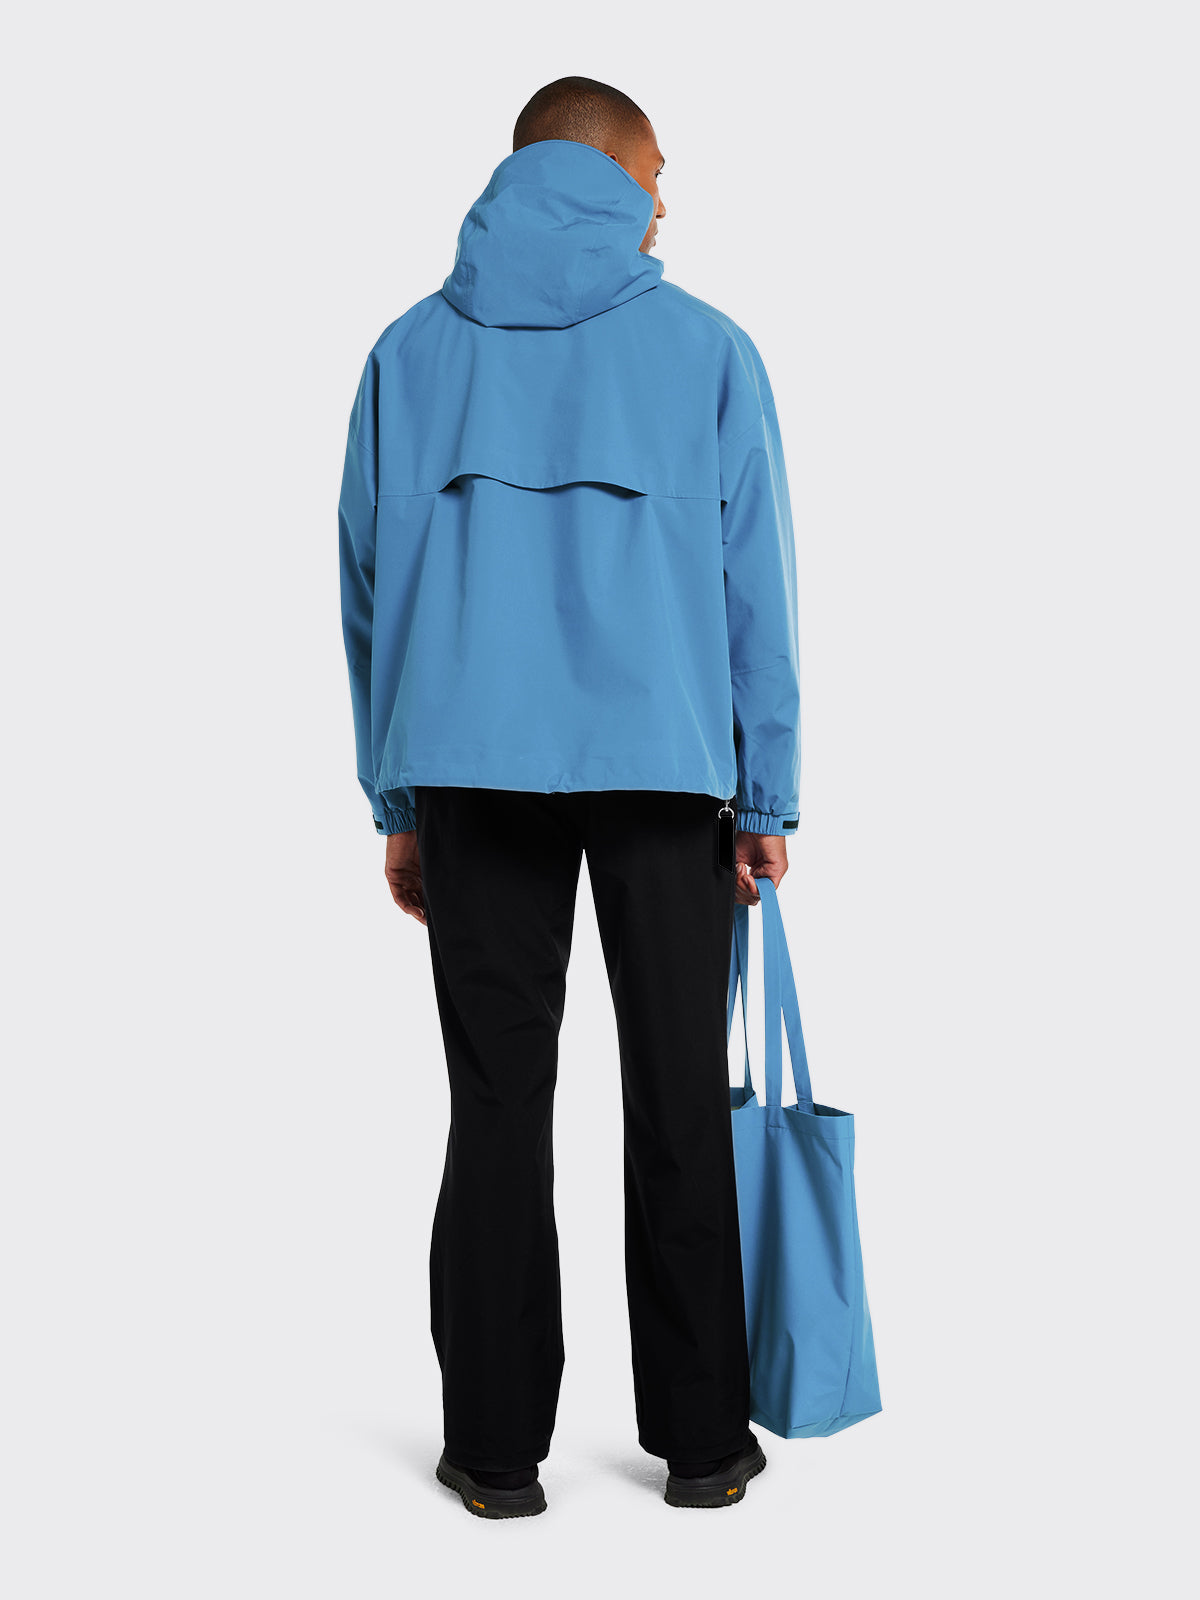 Man wearing Synes jacket and Moa tote bag in Coronet Blue from Blæst